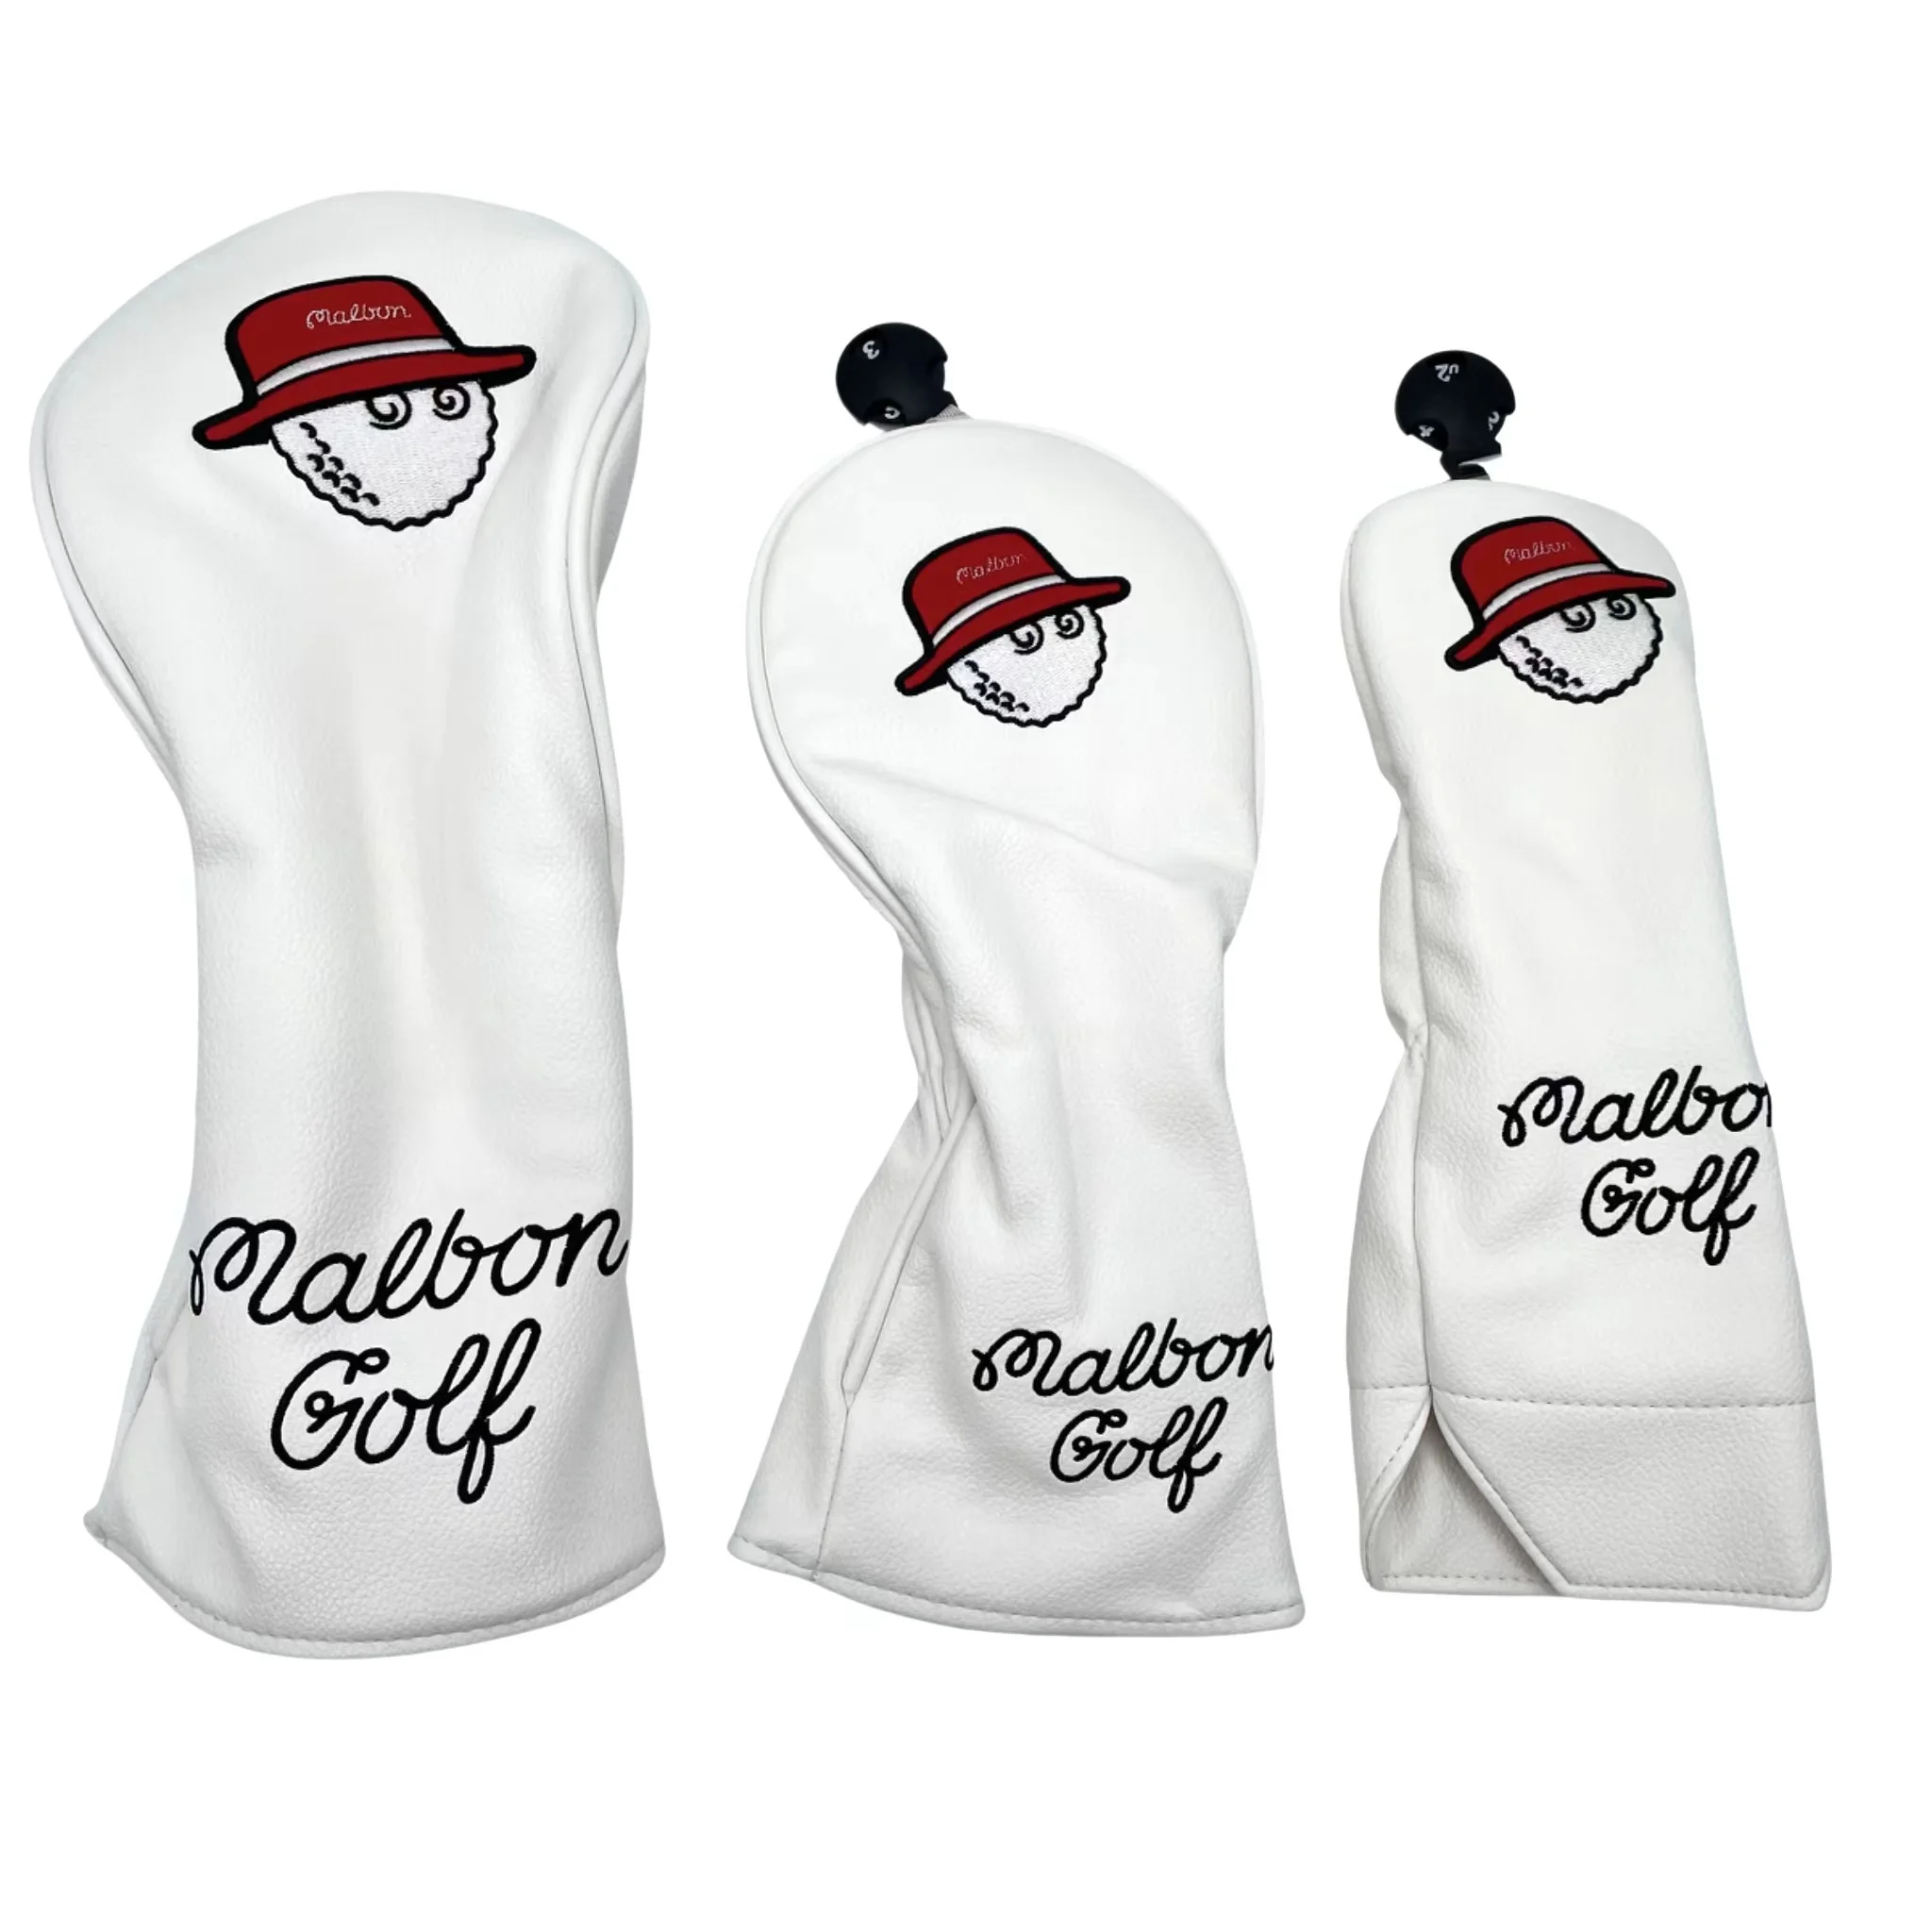 Golf Club #1 #3 #5 Fisherman's Hats Design Driver Fairway Woods Hybrid Putter And Mallet Putter Headcover Golf Head Covers